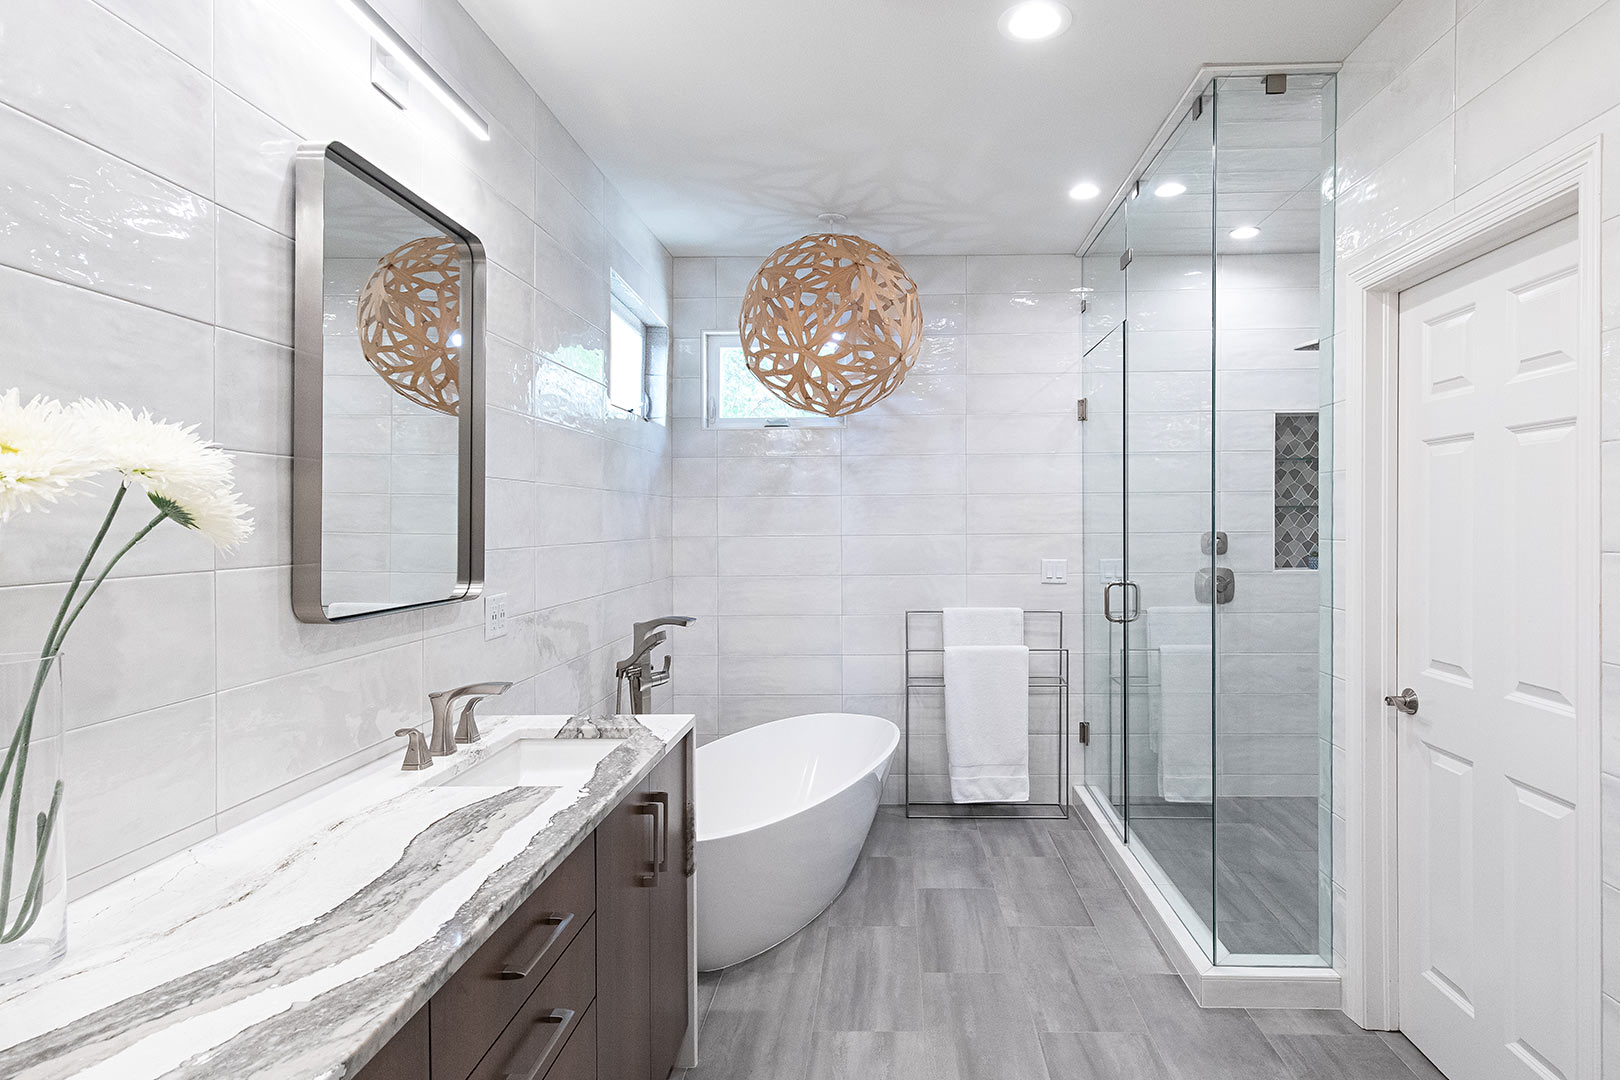 A contemporary primary bathroom renovation in fort collins colorado with floor to ceiling tile